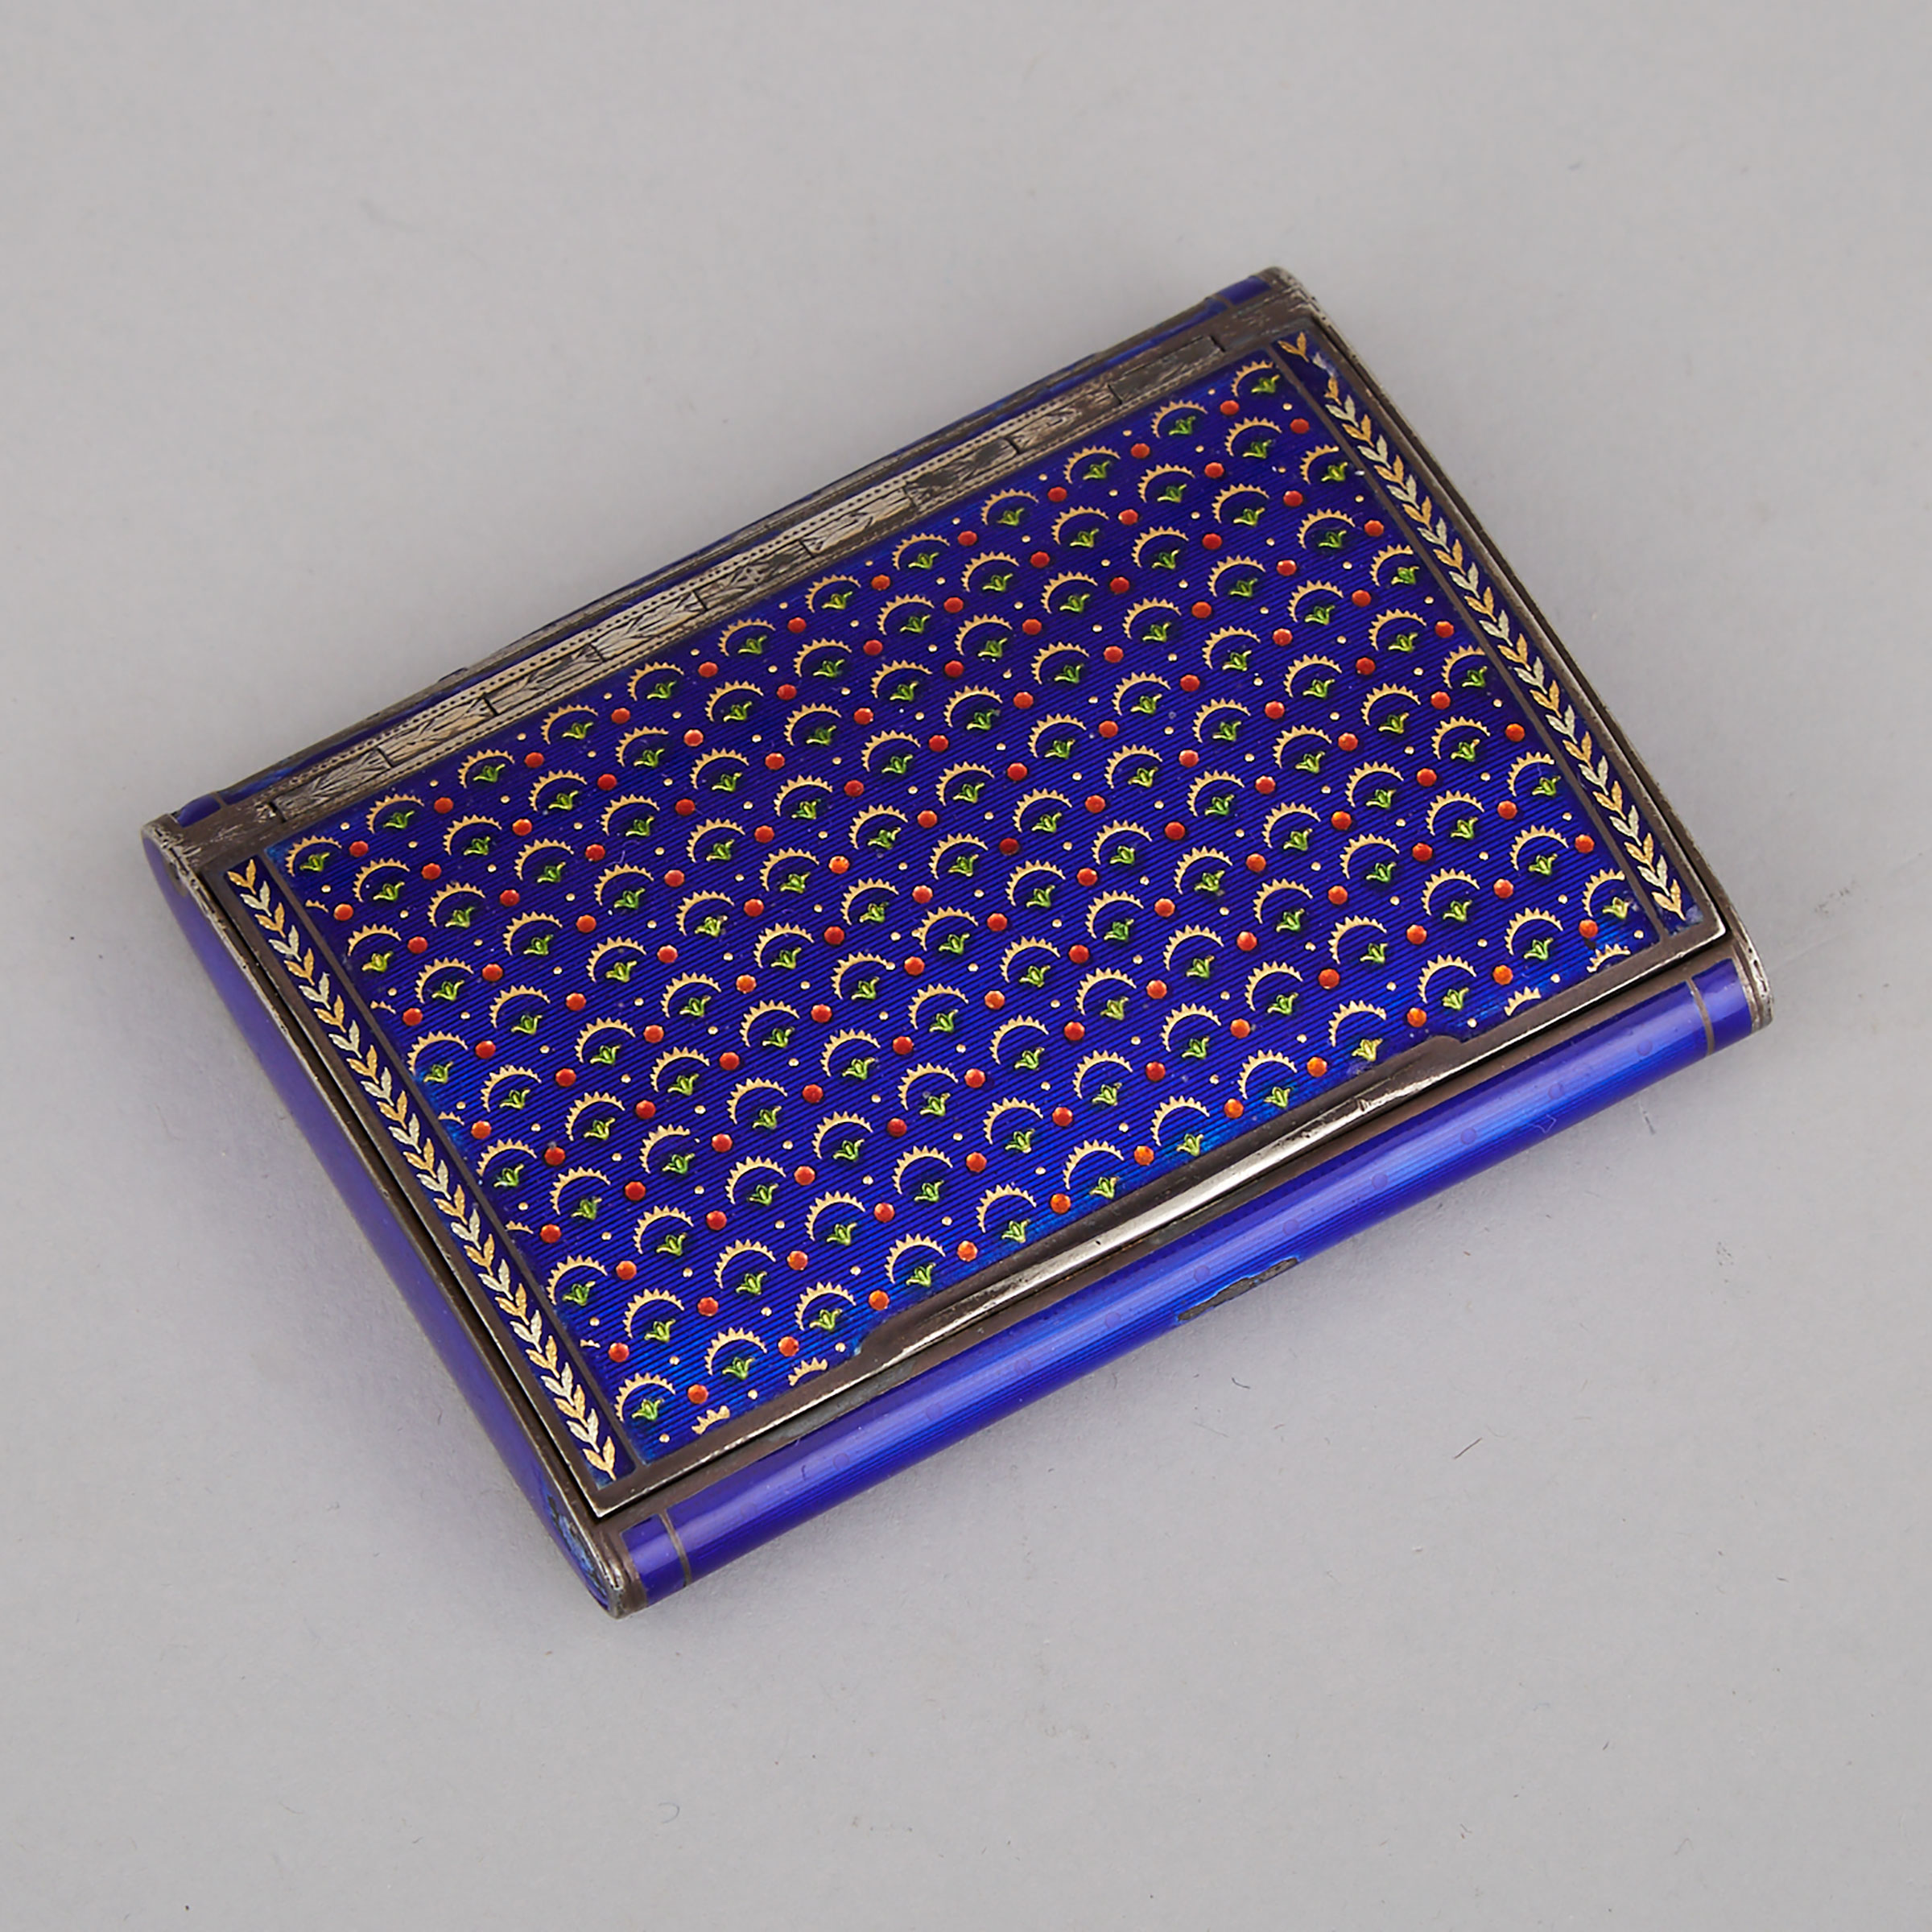 French Silver and Blue Enamel Cigarette Case, c.1900